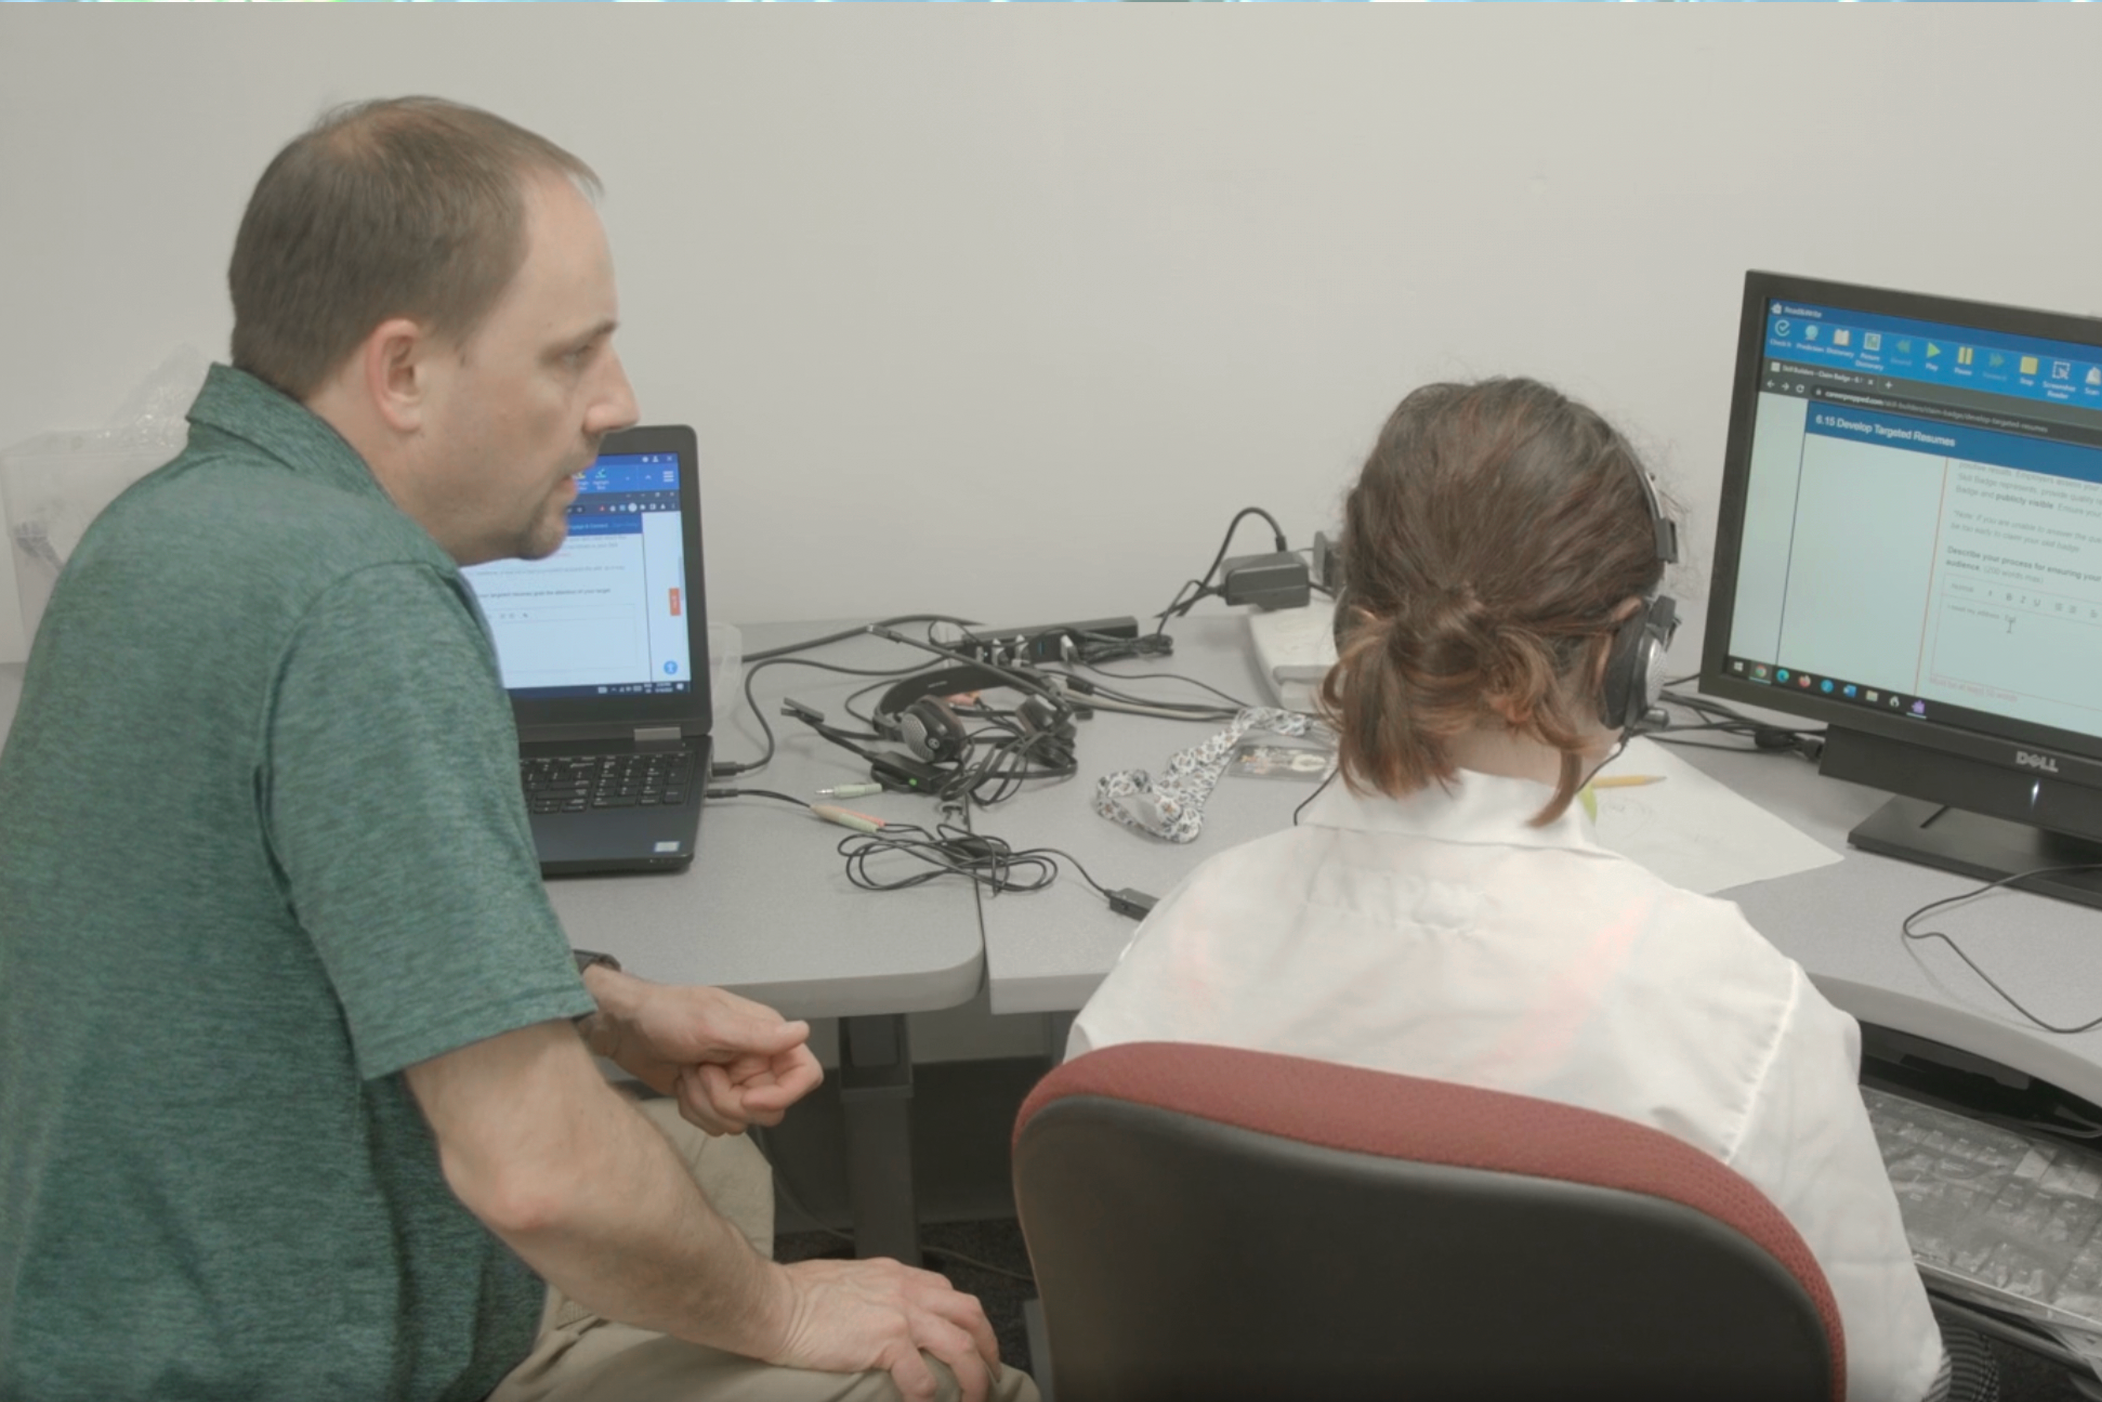 Instructor helping student on computer